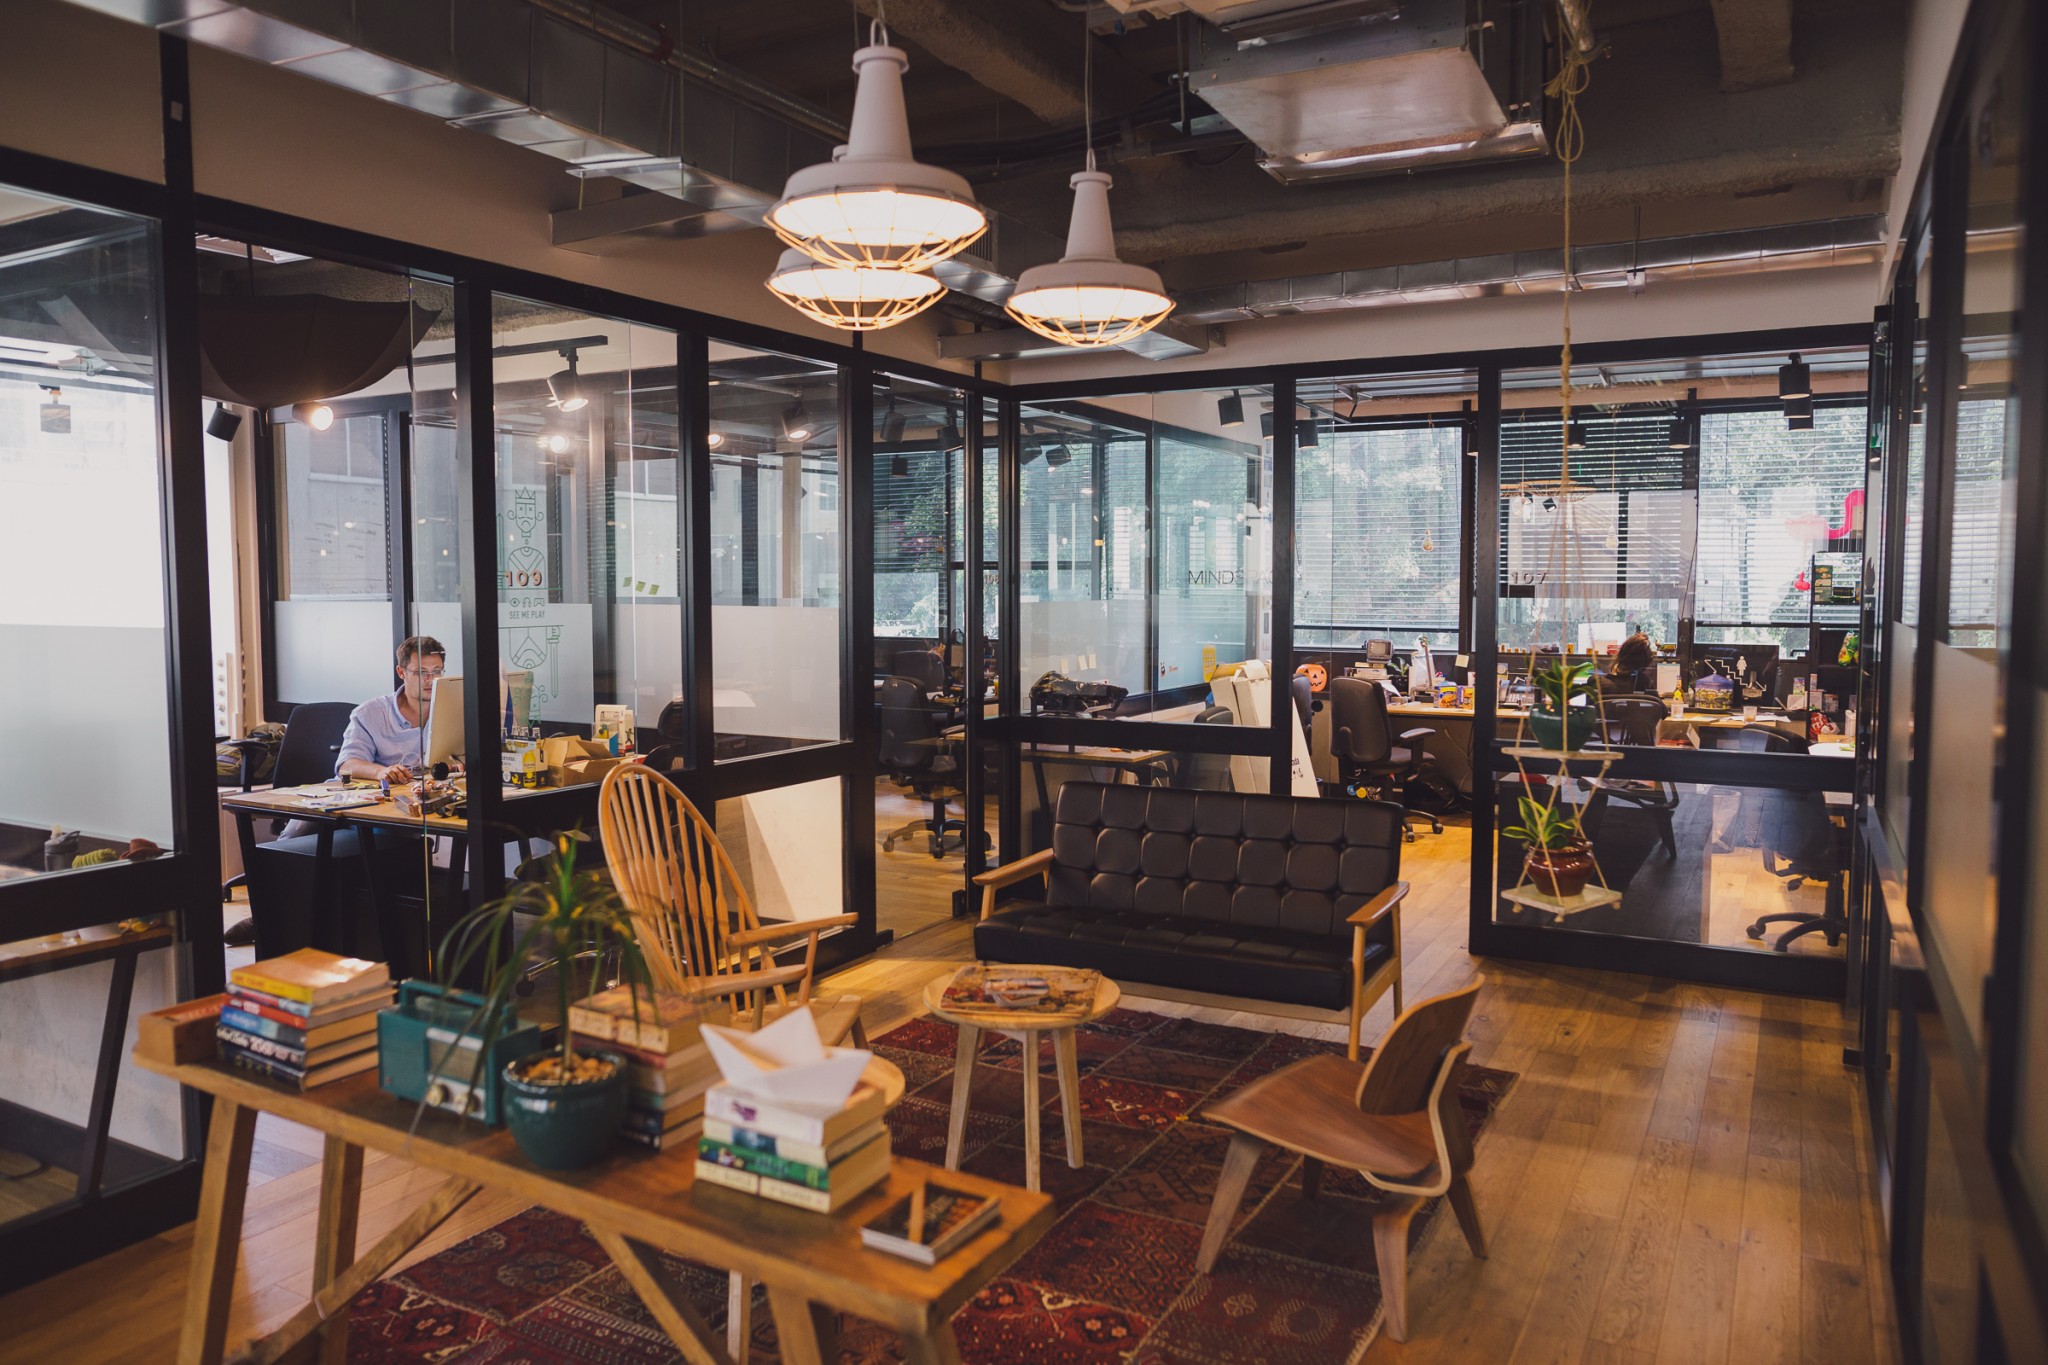 Coworking space Mindspace raises $15 million to expand operations